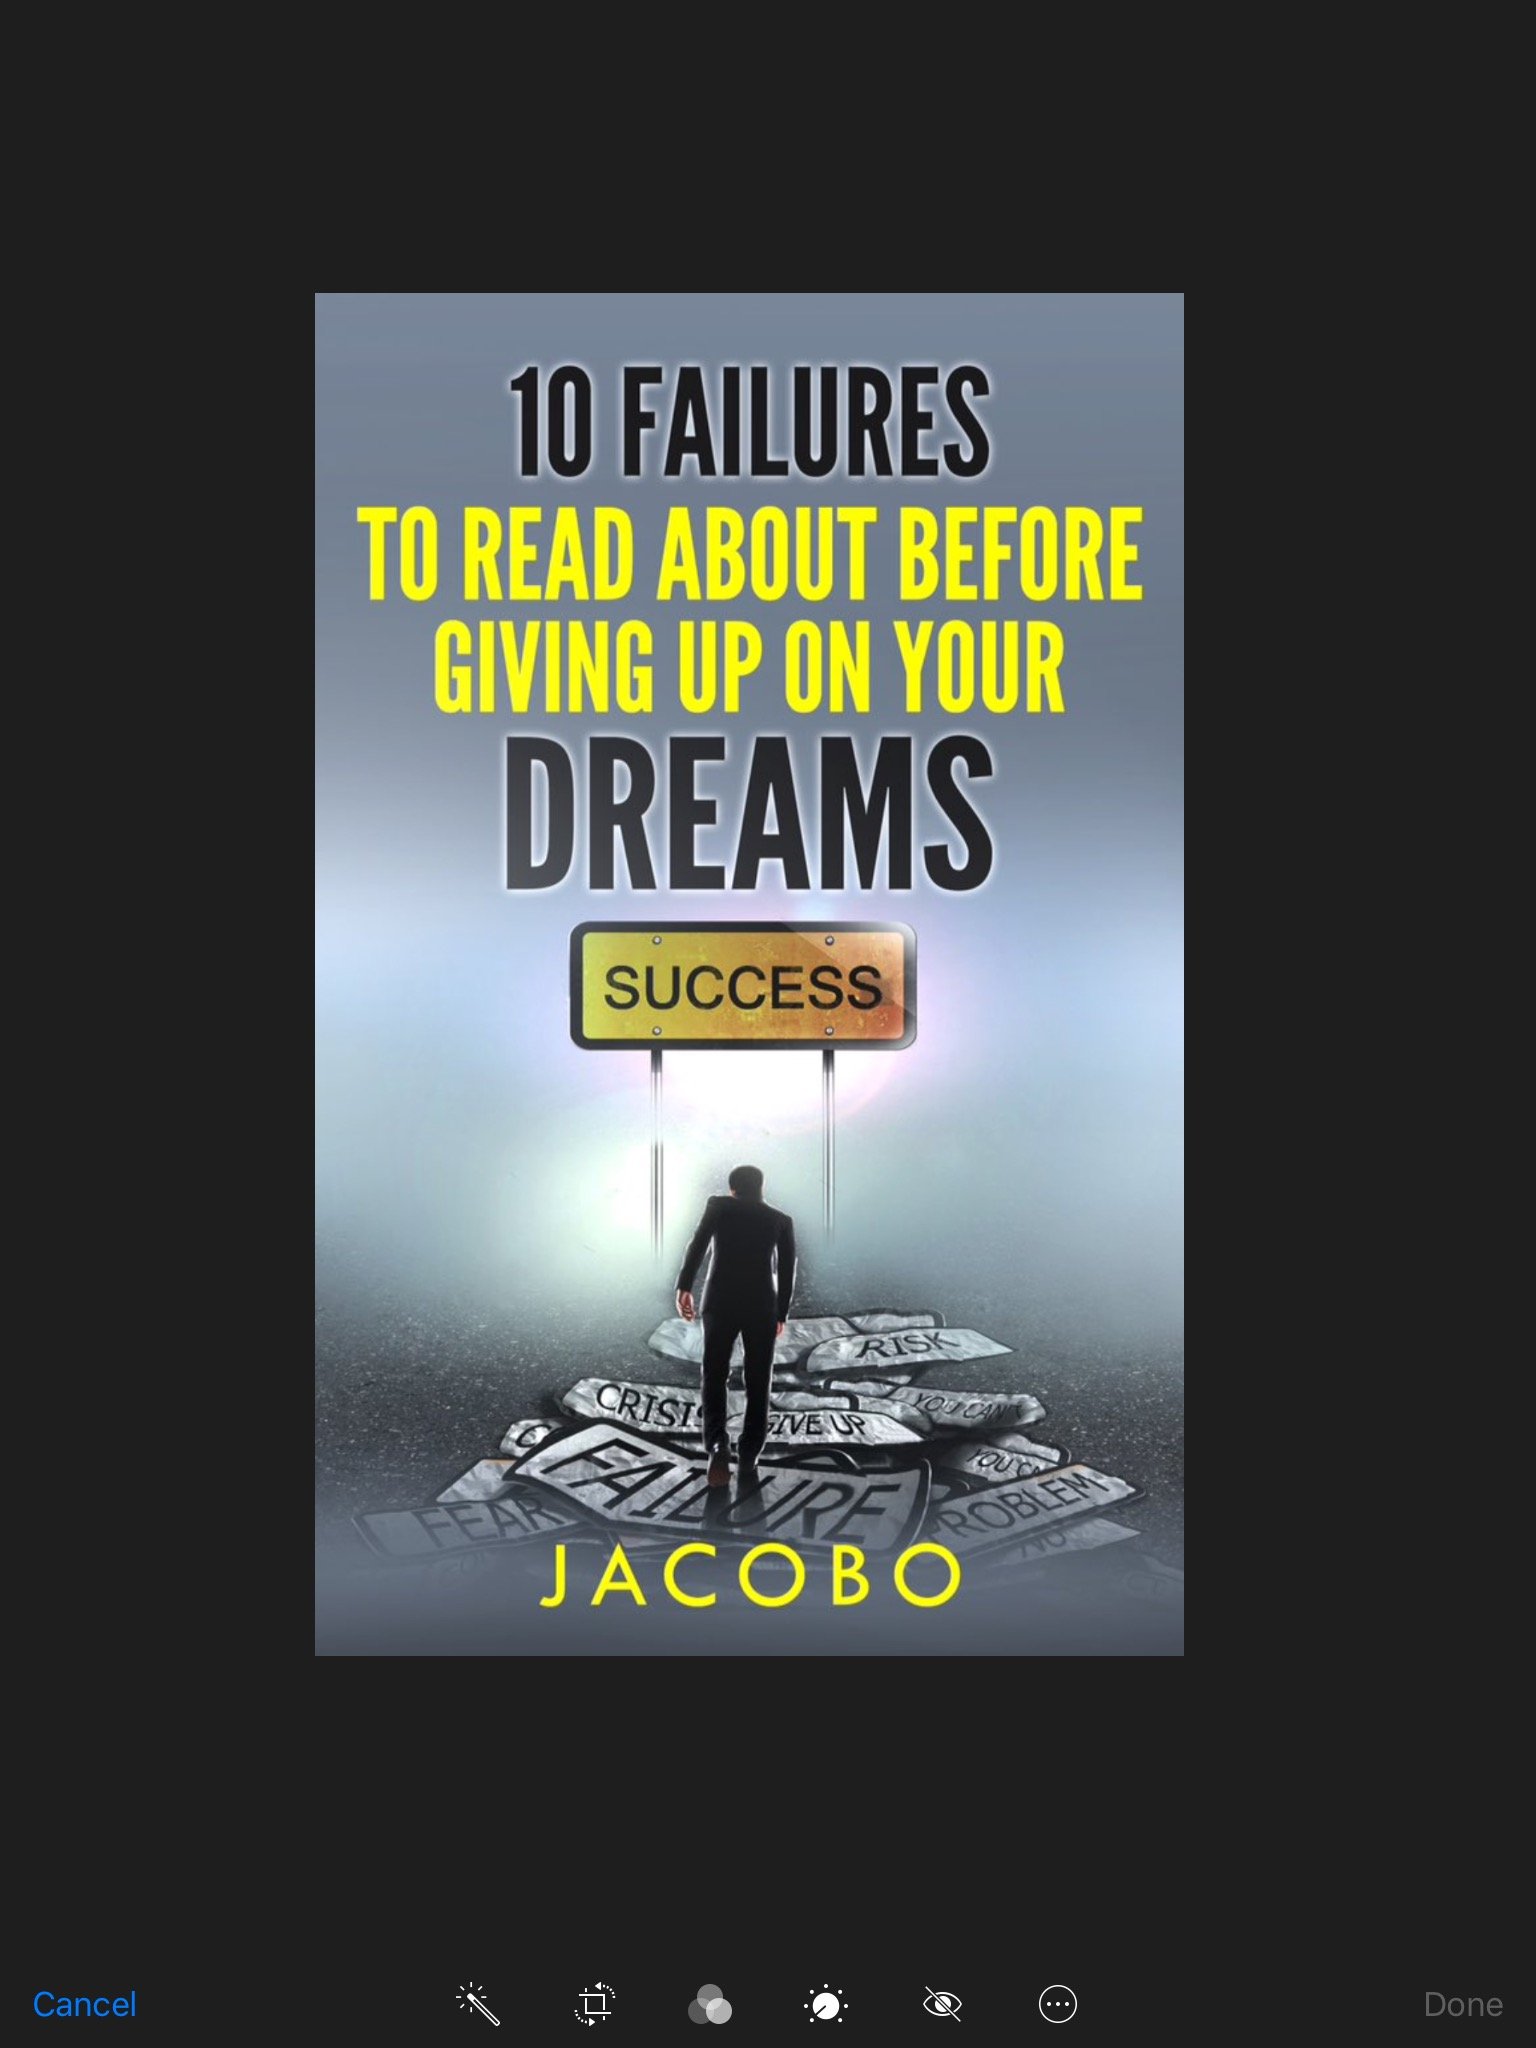 Inspiring you to overcome failure in pursuit of achieving your dreams. New eBook available on Amazon, get your copy and leave a review!